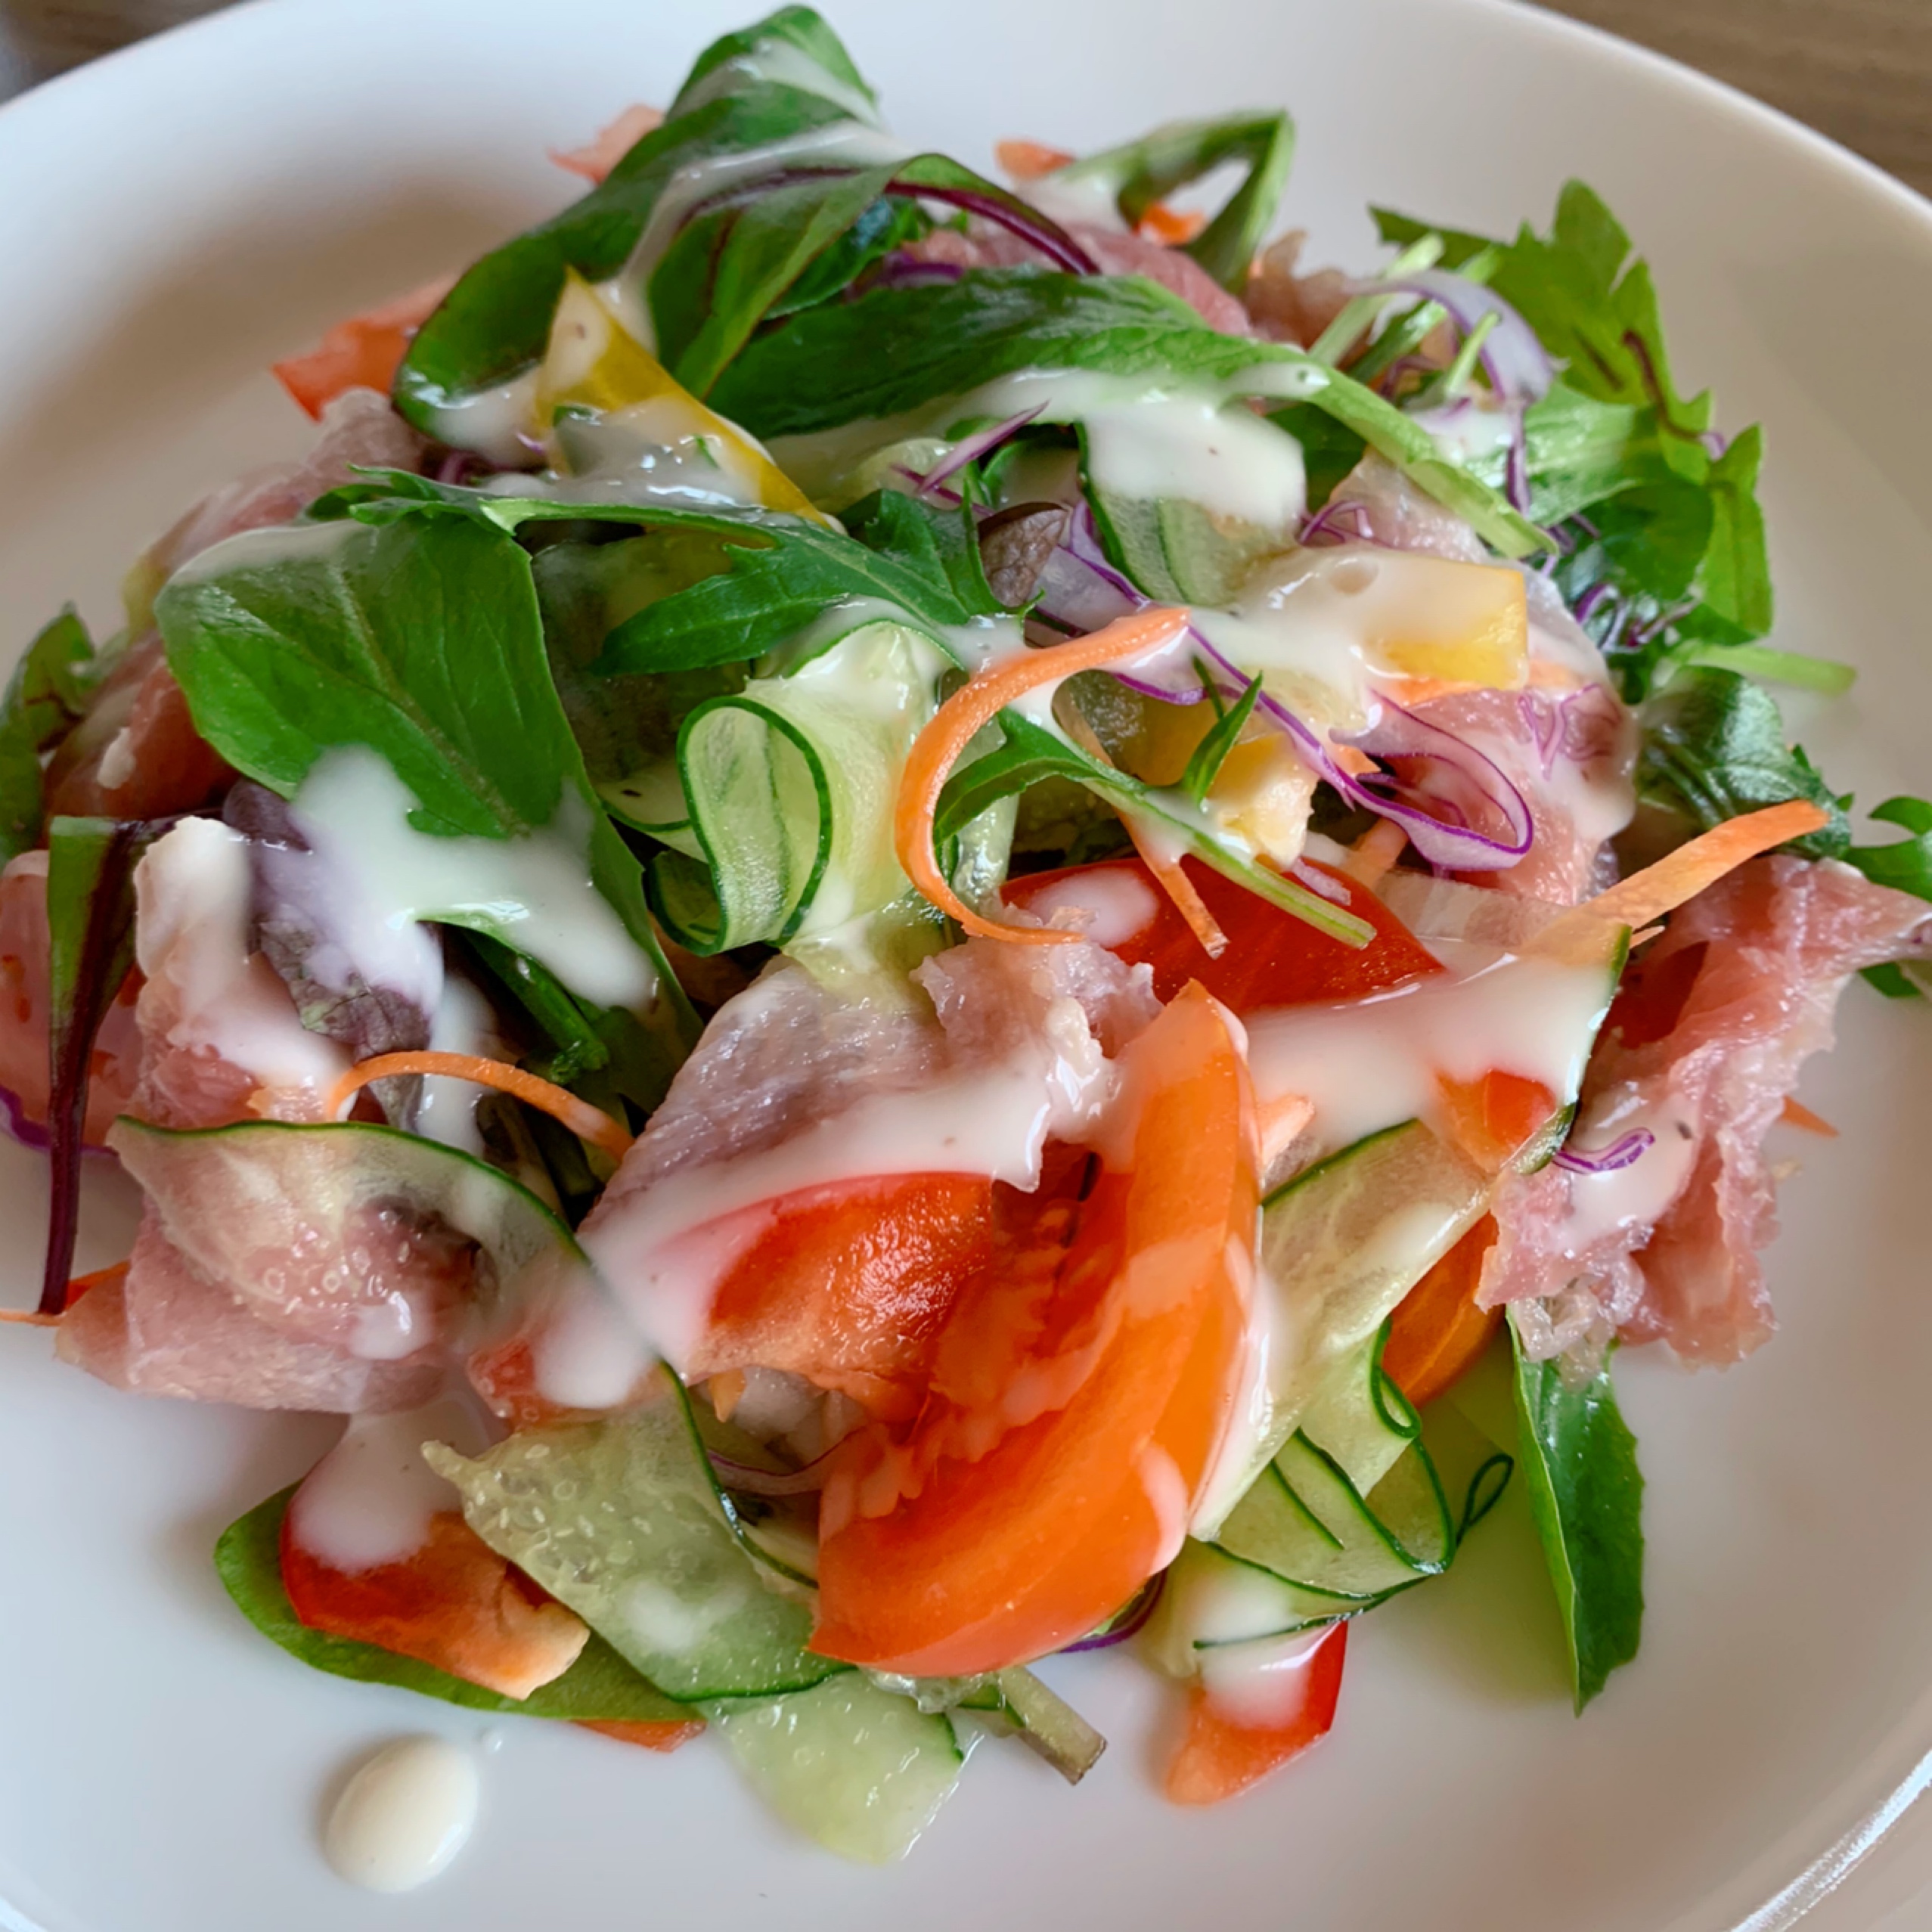 A salad made with plenty of dry-cured ham and baby leaves.